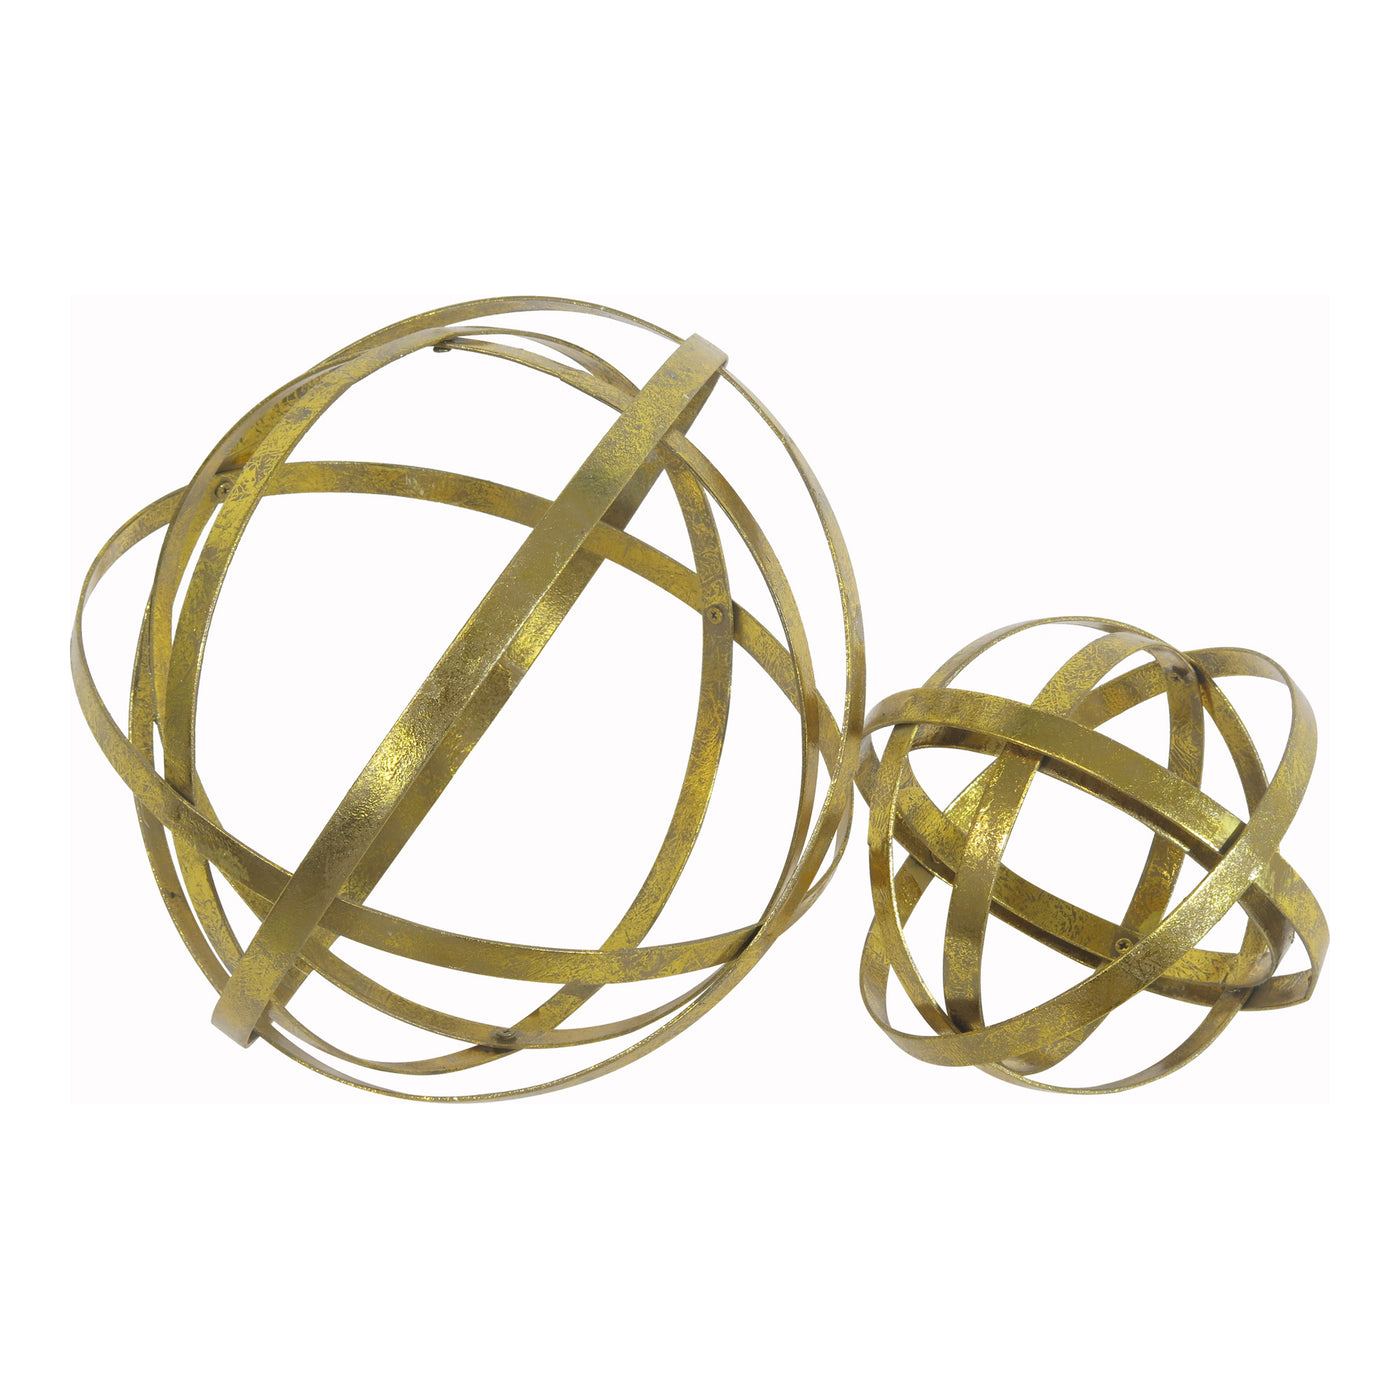 The Gold Sphere accent piece features a flowing, cosmic aesthetic. Constructed from iron and finished in gold providing wa...